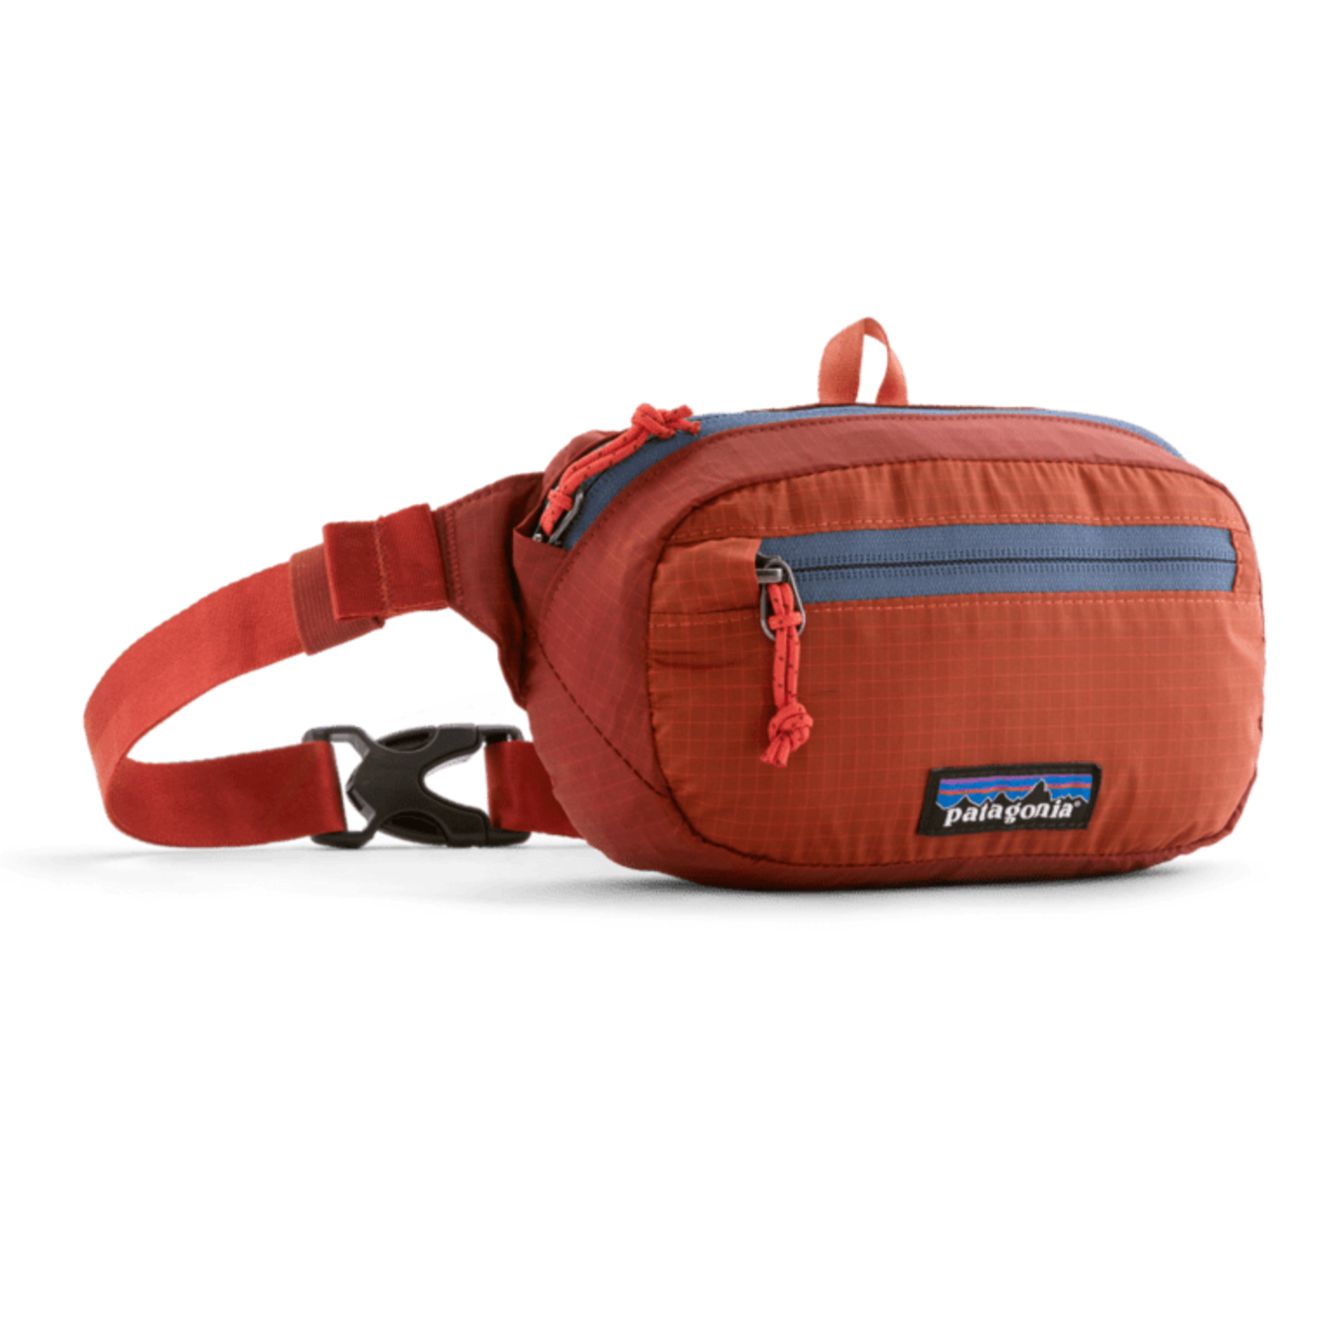 Patagonia Black Hole Ultra-Light Mini Hip Pack-Luggage-Mangrove Red-One Size-Kevin's Fine Outdoor Gear & Apparel